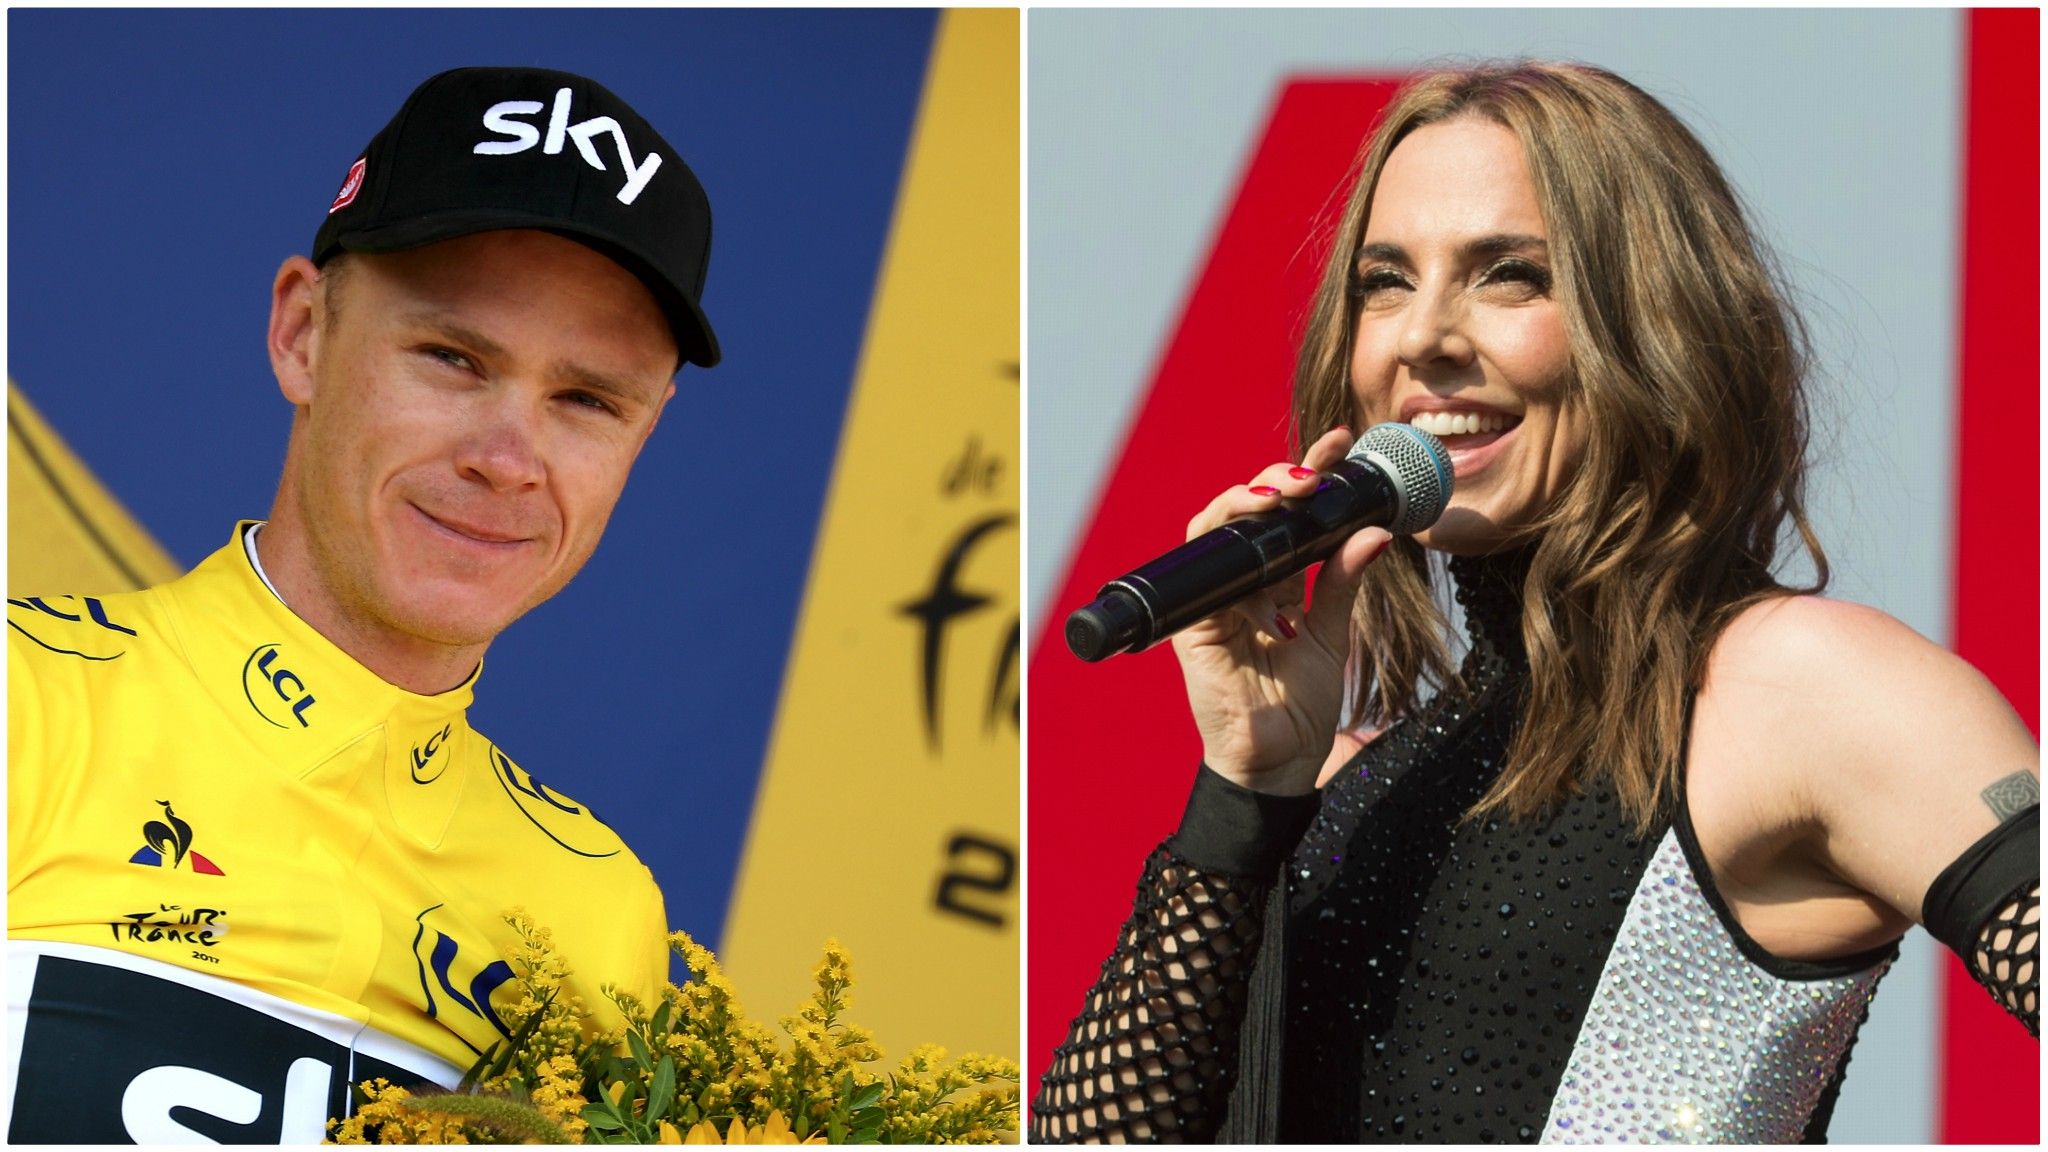 Chris Froome and Mel C